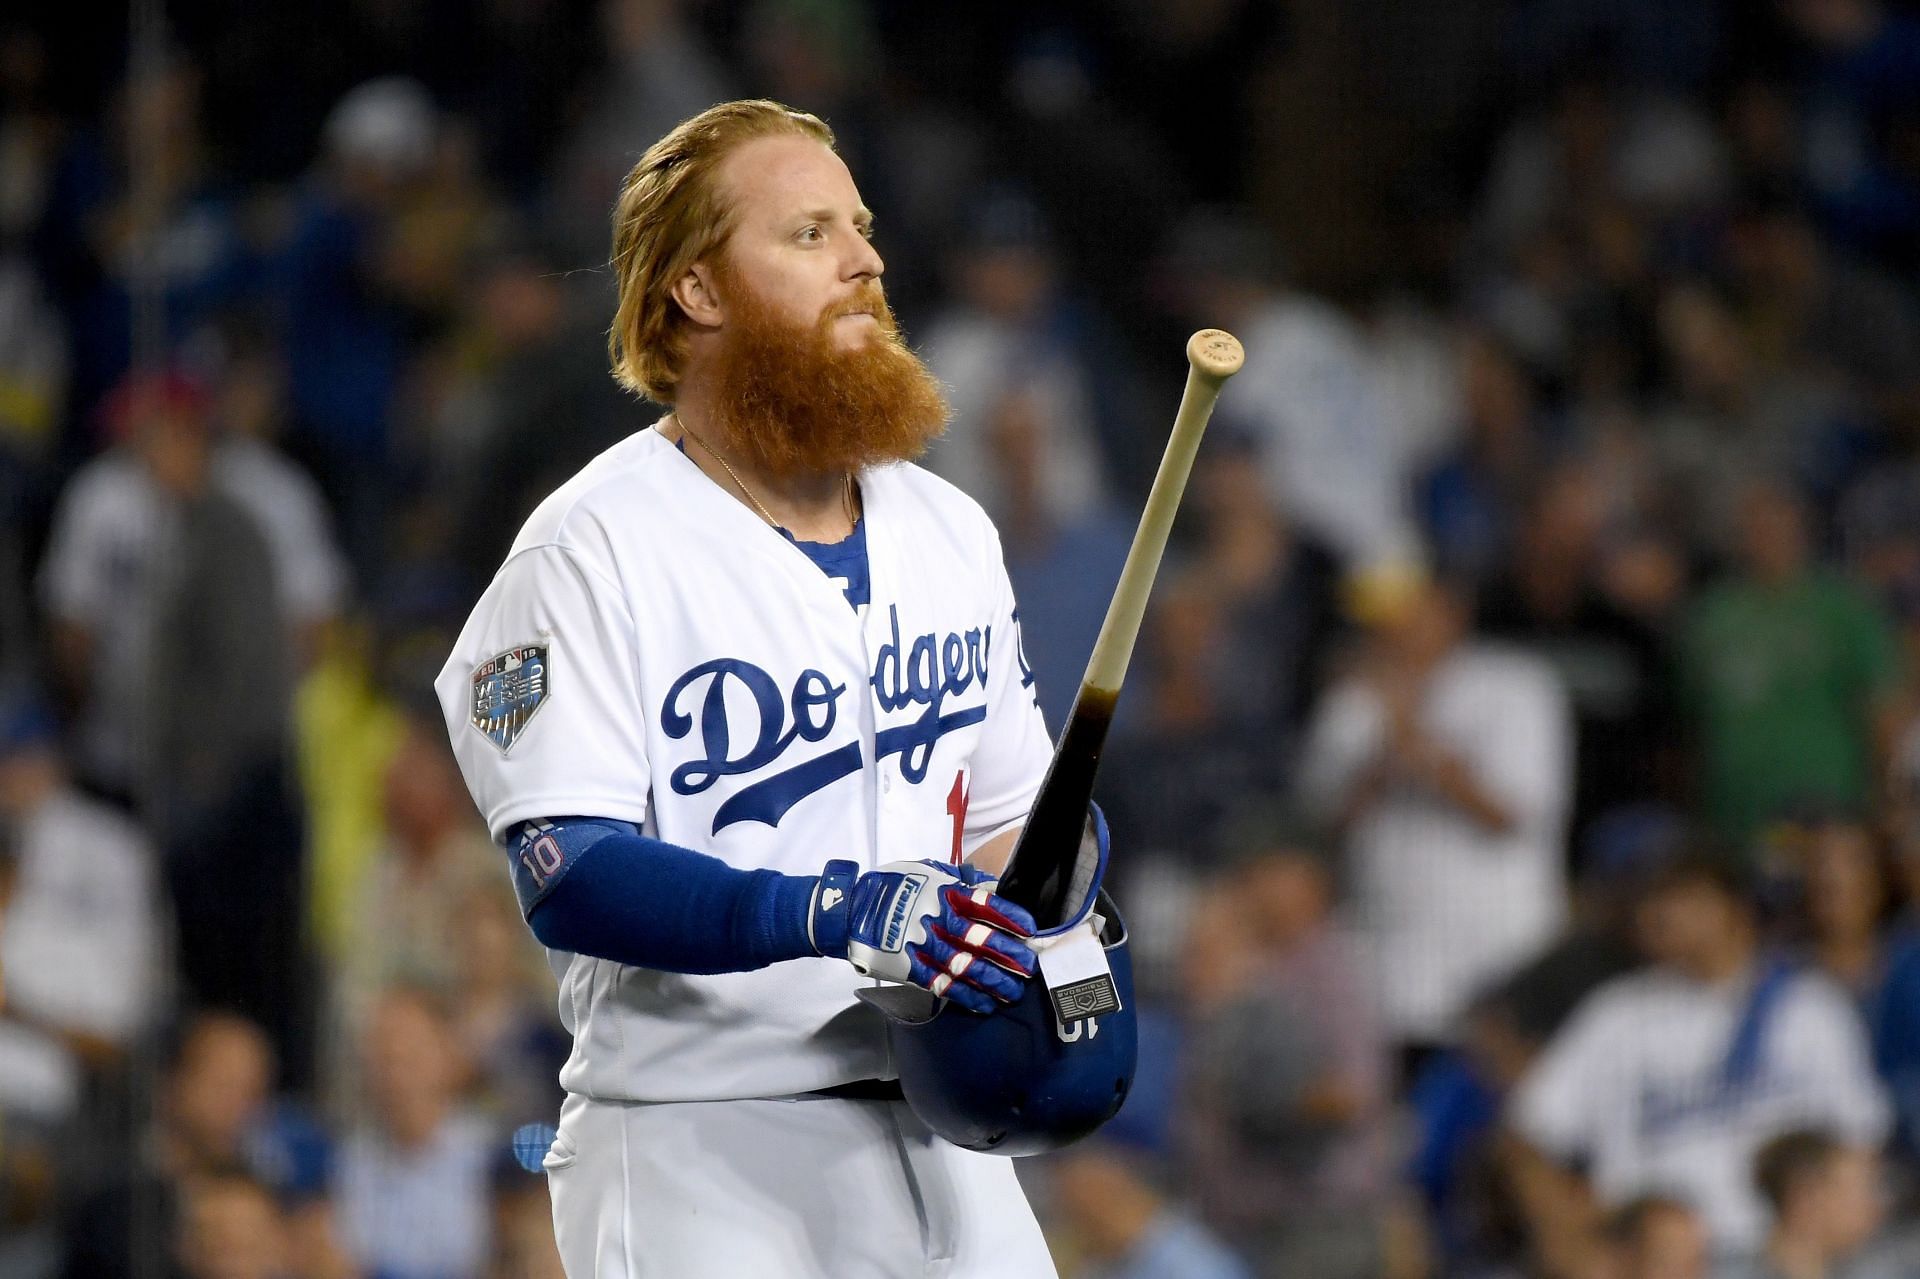 Red Sox's Justin Turner receives 16 stitches after getting hit by